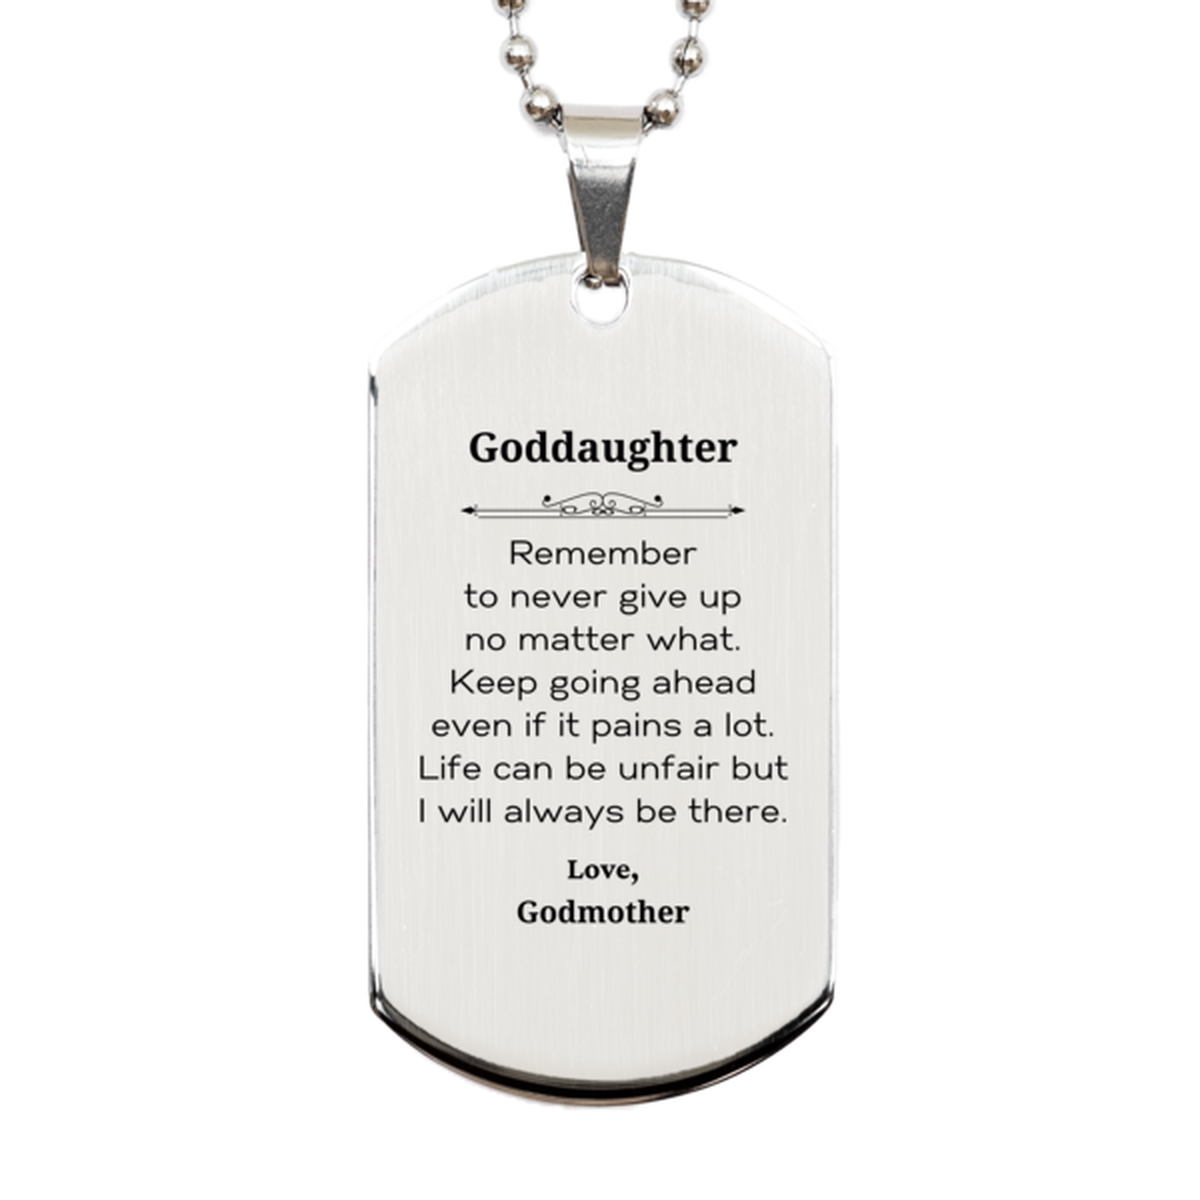 Goddaughter Motivational Gifts from Godmother, Remember to never give up no matter what, Inspirational Birthday Silver Dog Tag for Goddaughter